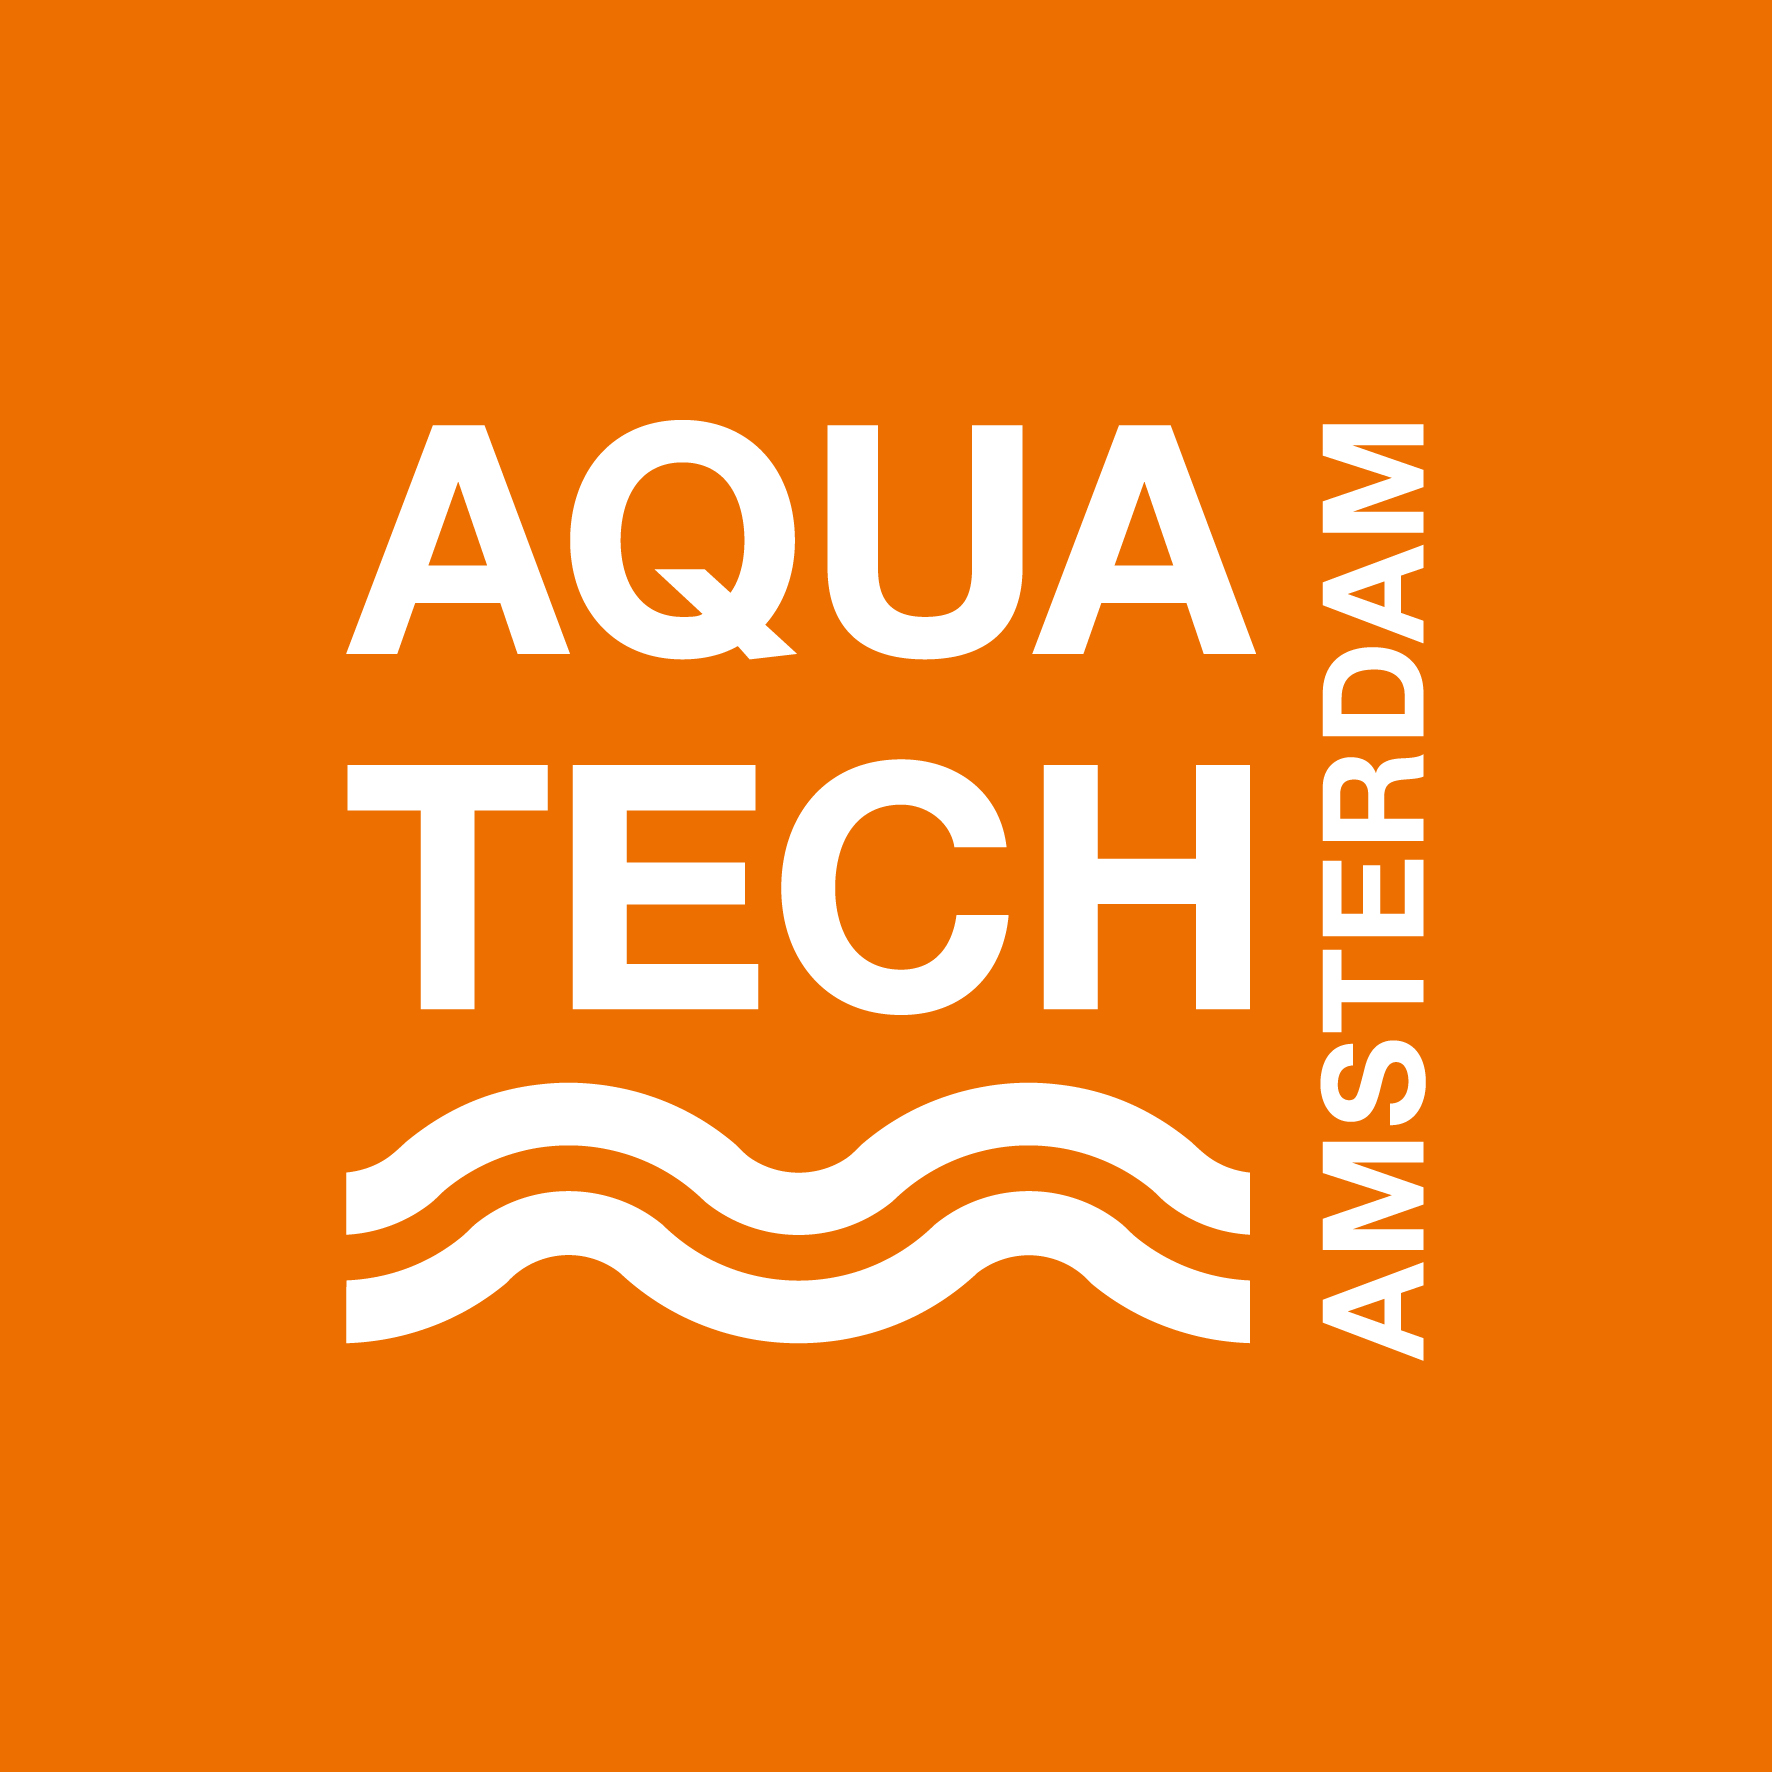 Aquatech Amsterdam 2019 has already sold 75% of its exhibition space.